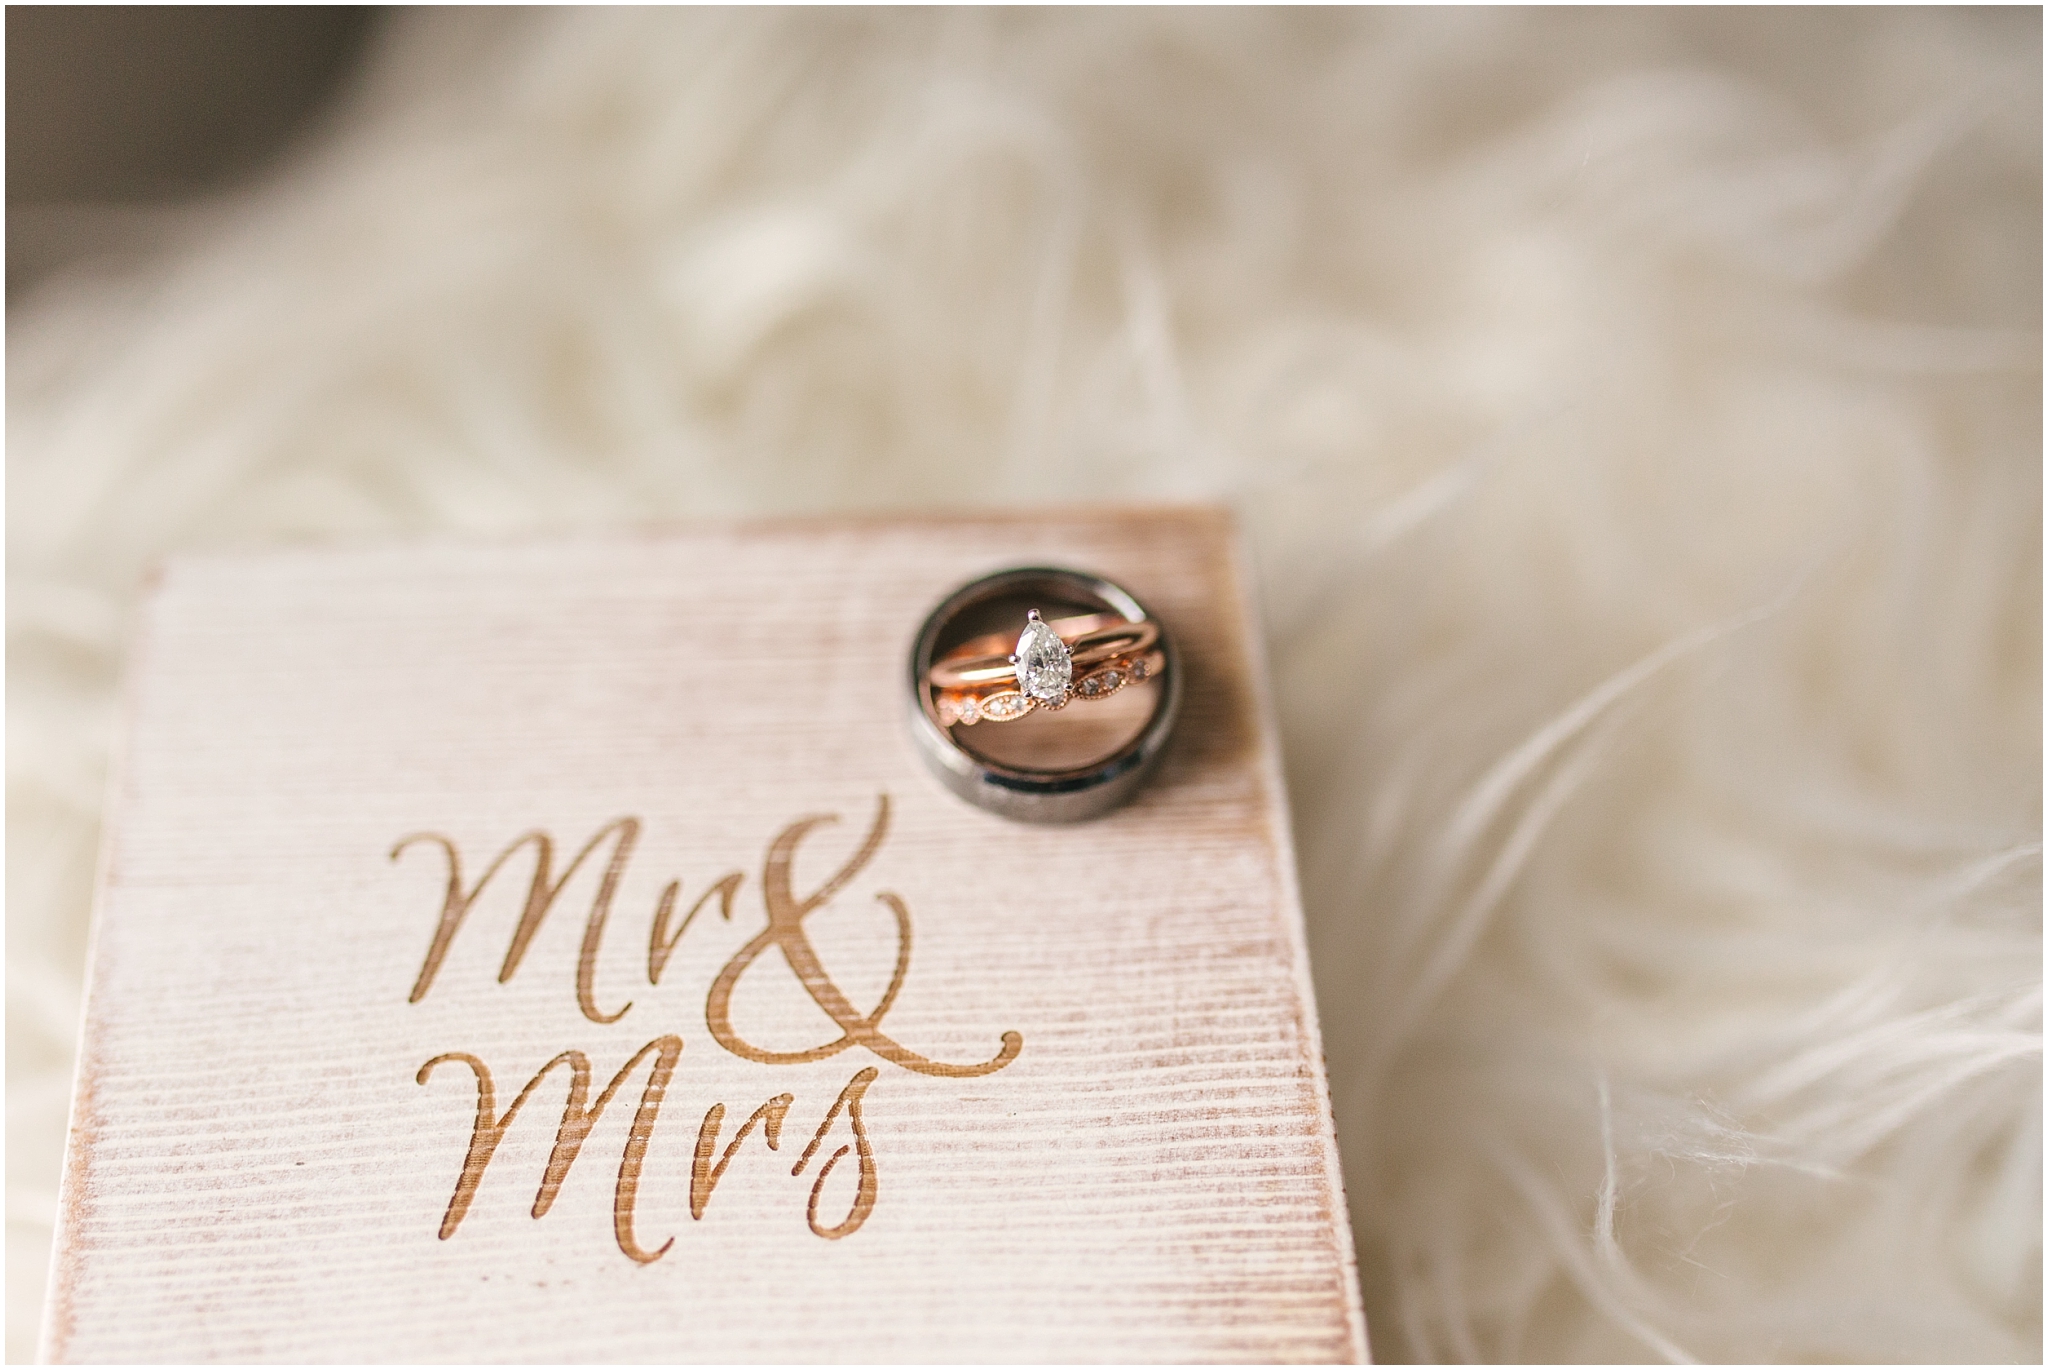 Rose gold and tungsten wedding rings